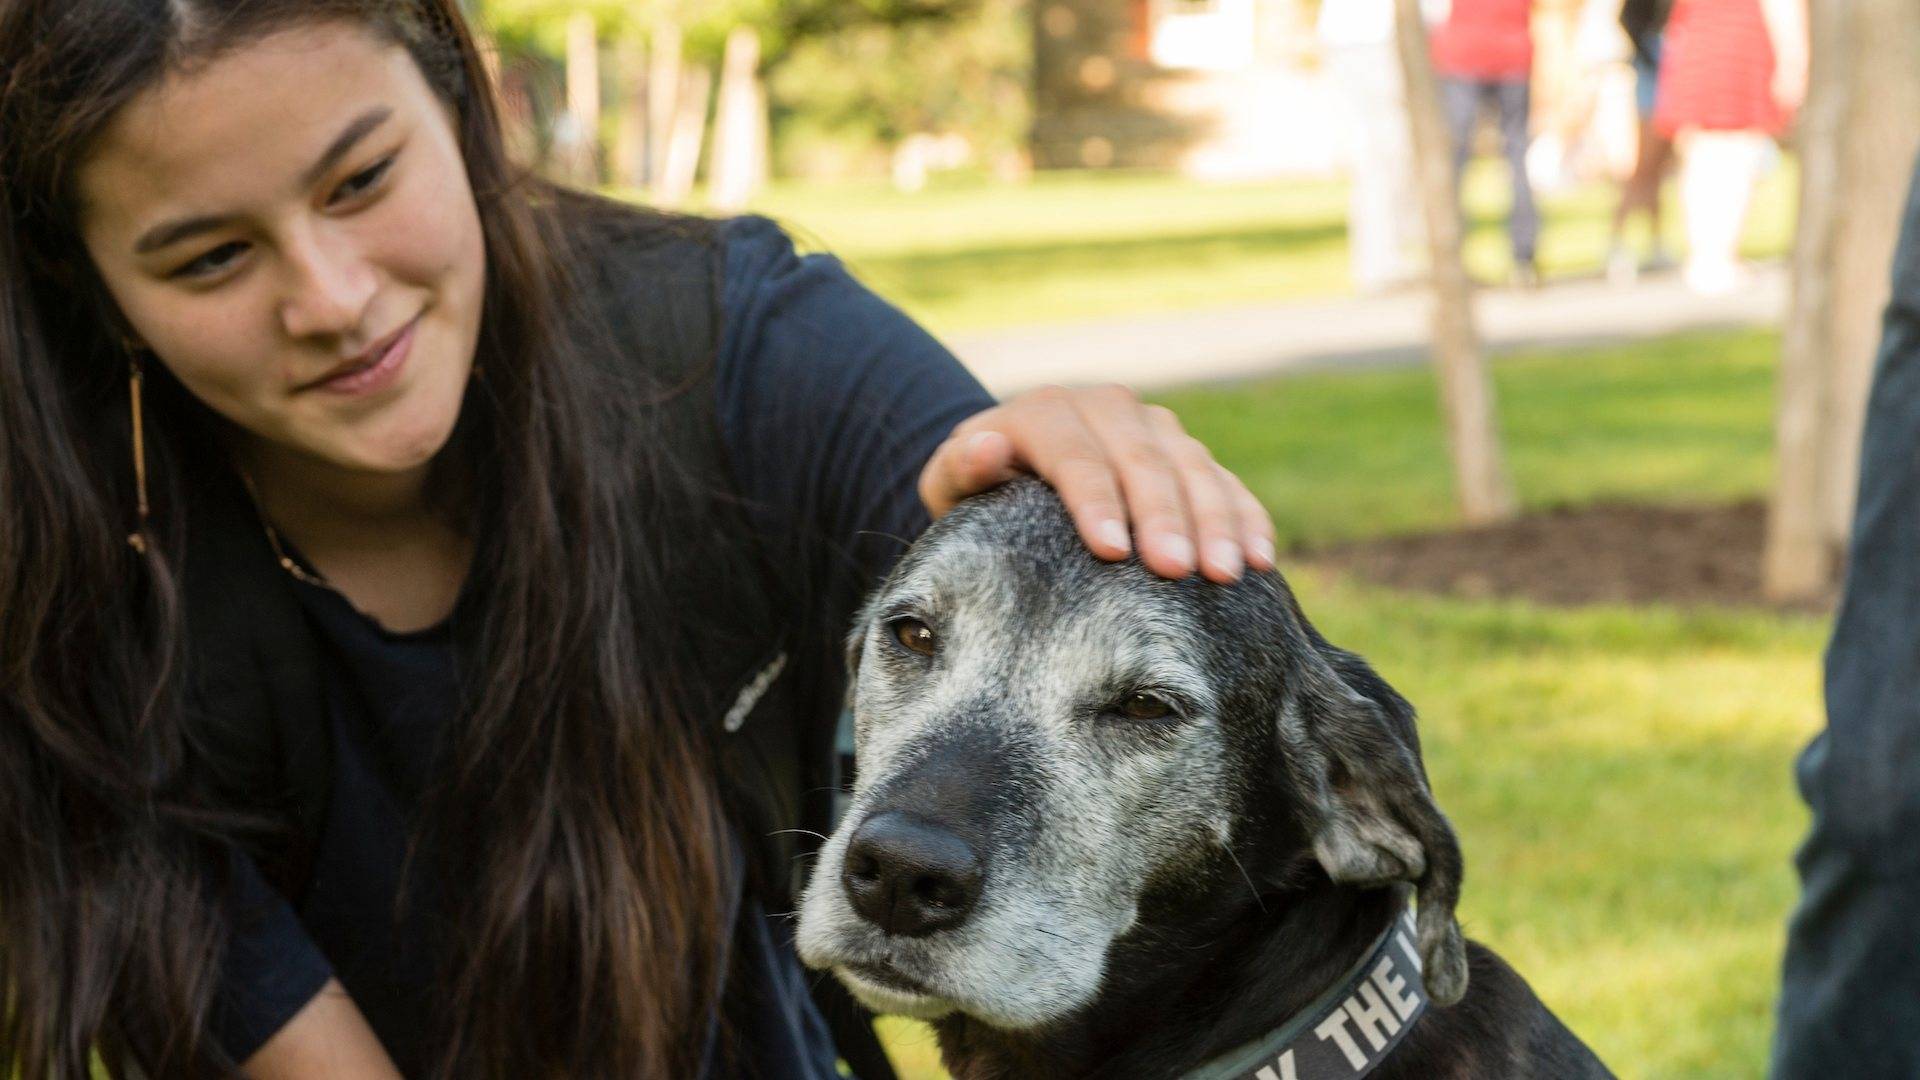 Student pets a faculty member's dog